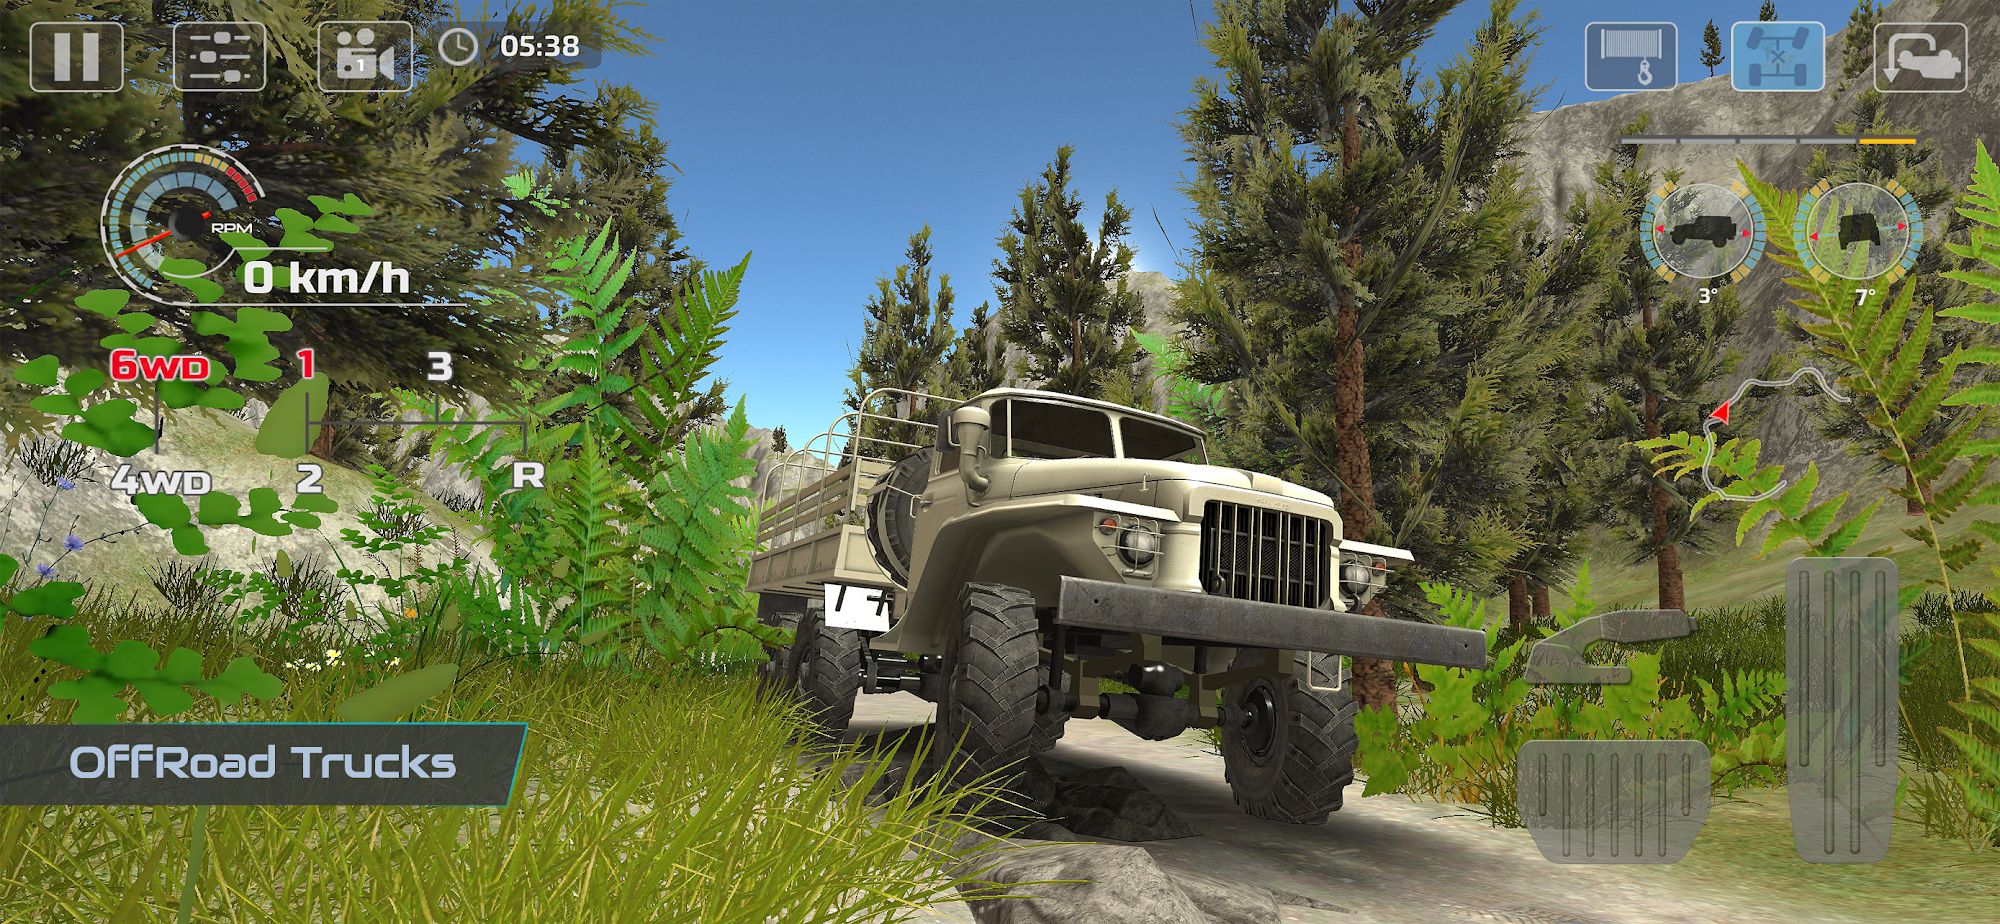 Gameplay of the OffRoad Drive Pro for Android phone or tablet.